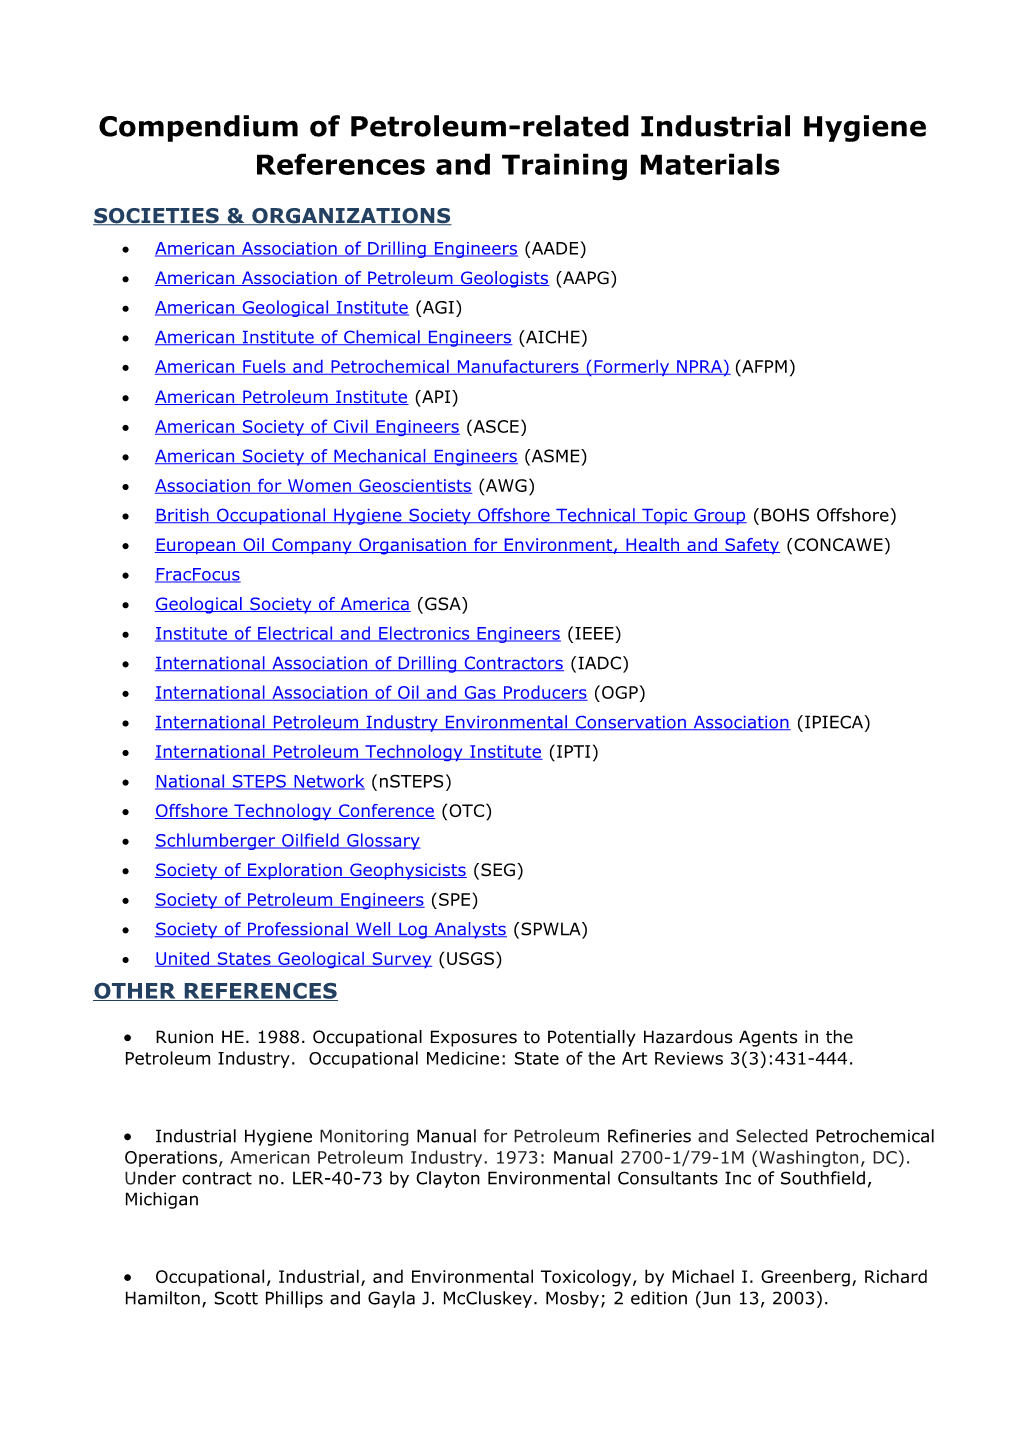 Compendium of Petroleum-Related Industrial Hygiene References and Training Materials